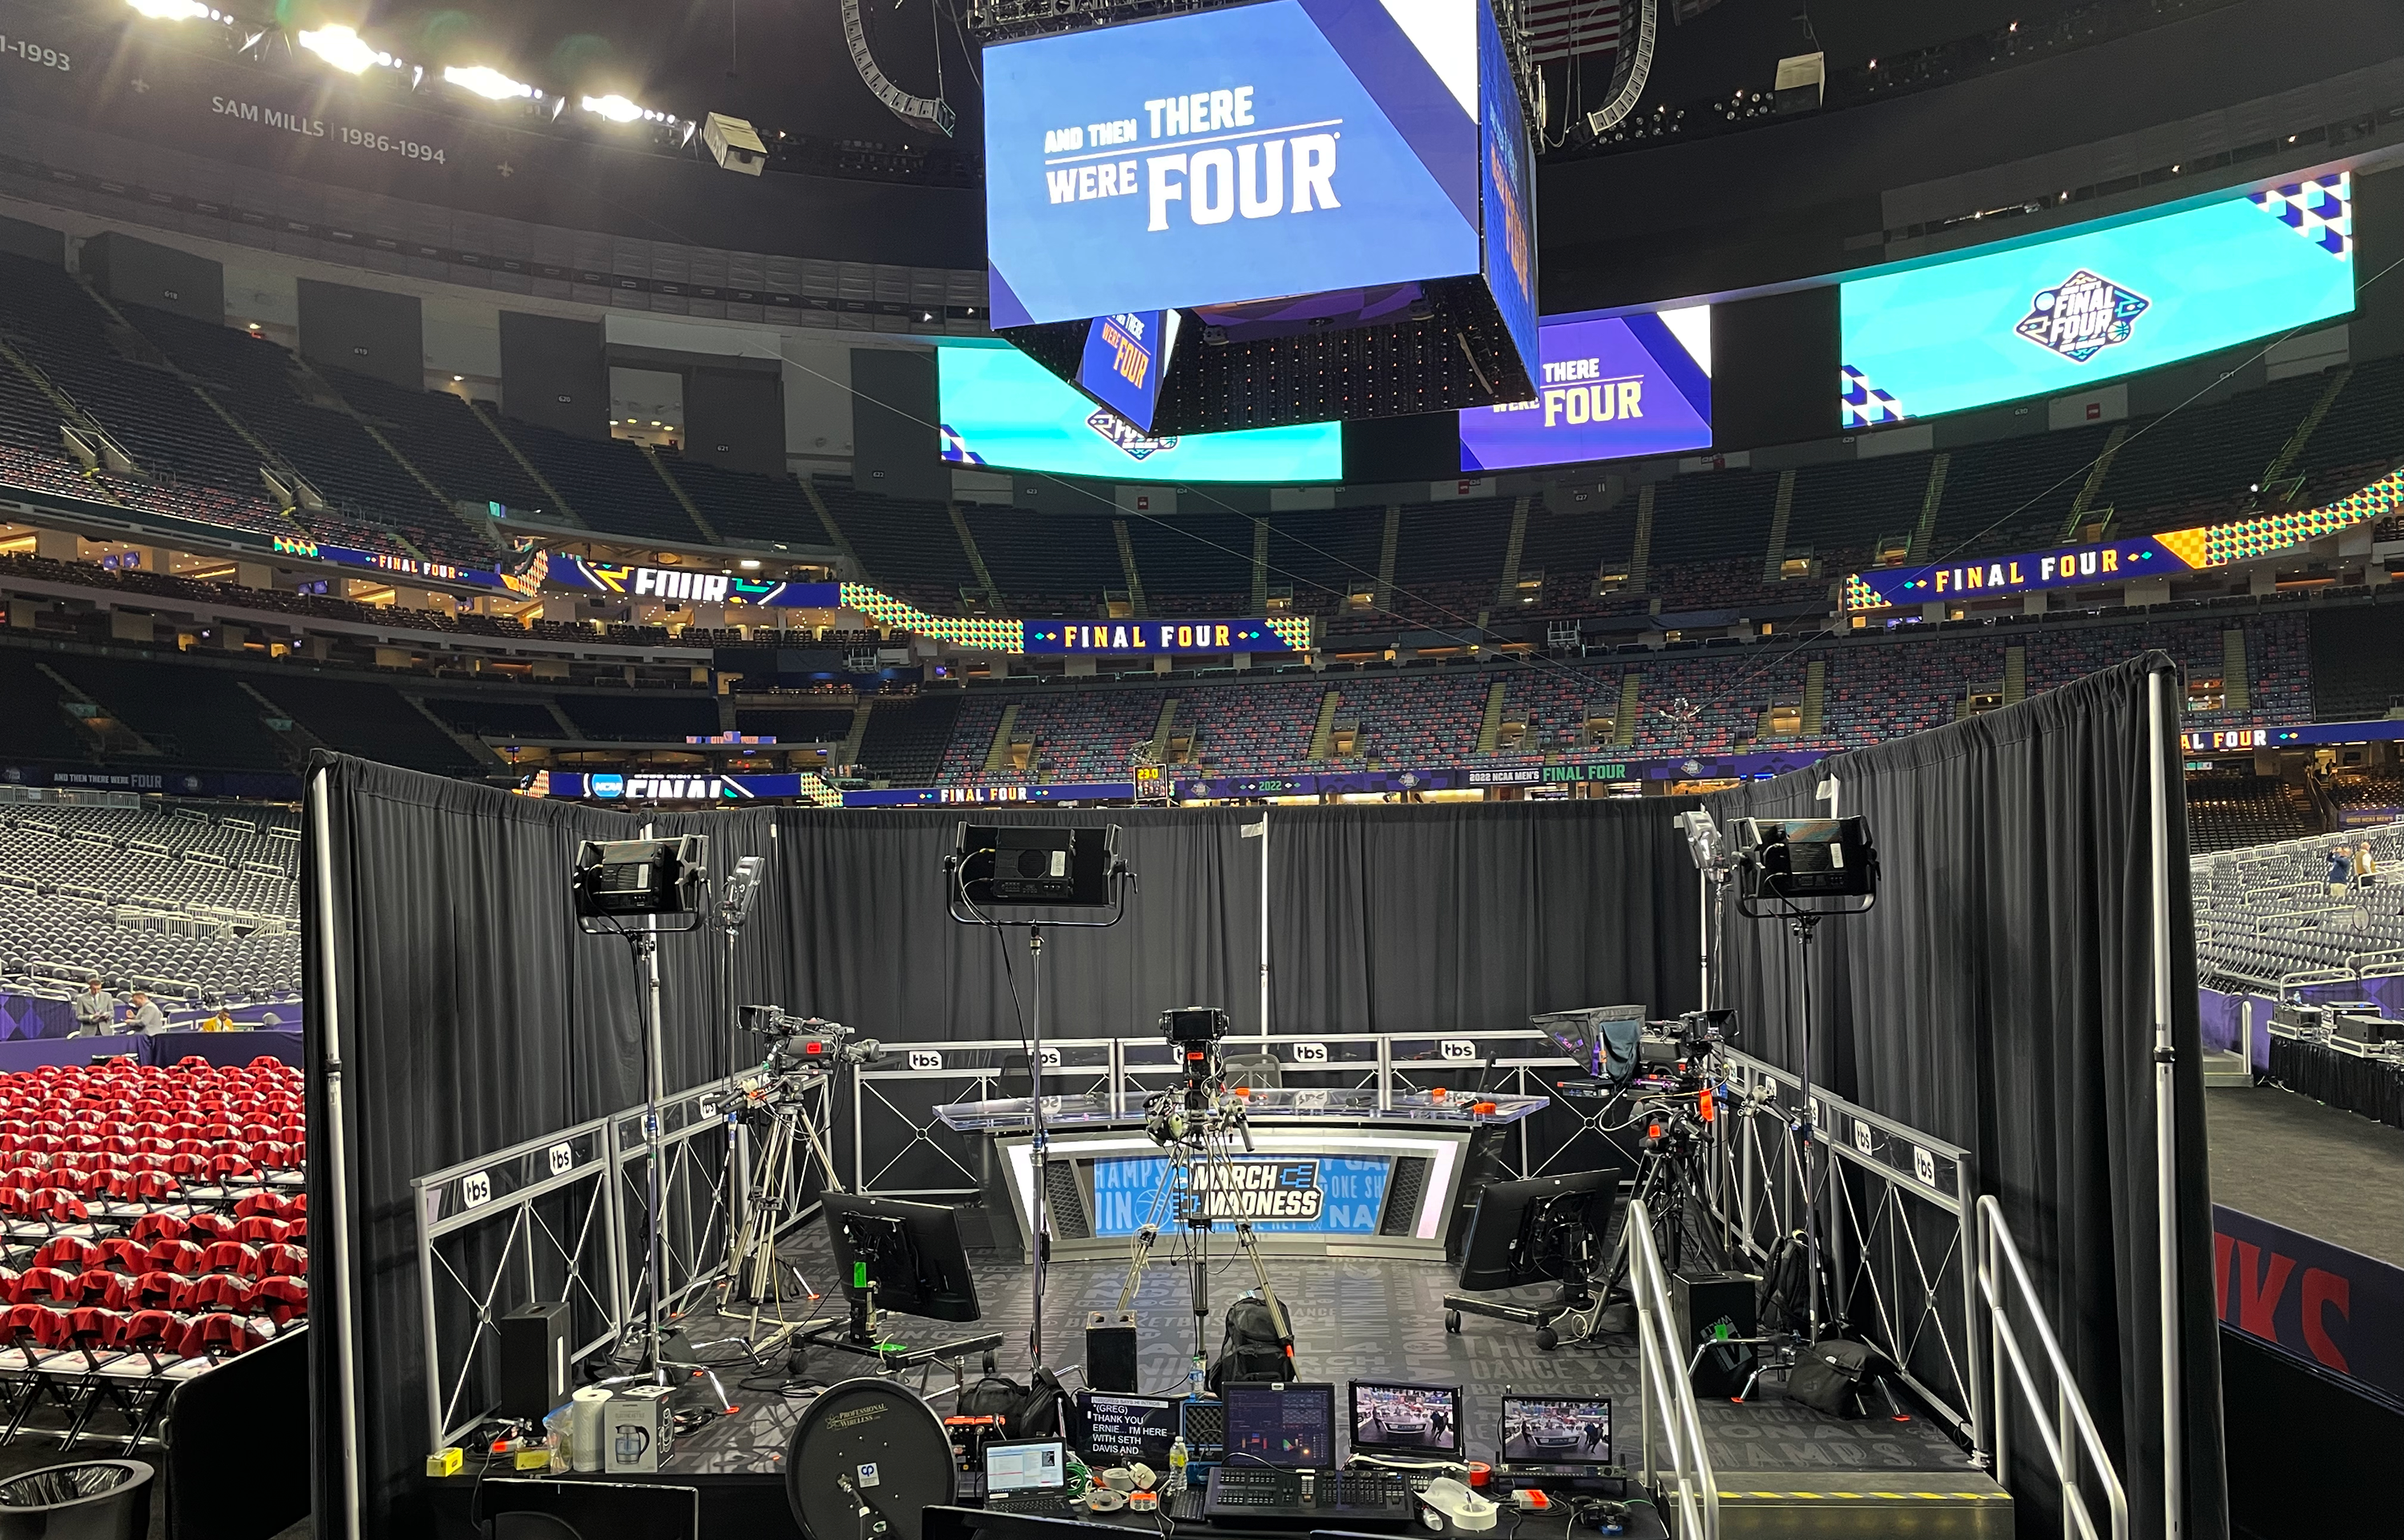 Live From Mens Final Four CBS, Turner Bring Their Best For an NCAA Championship for the Ages